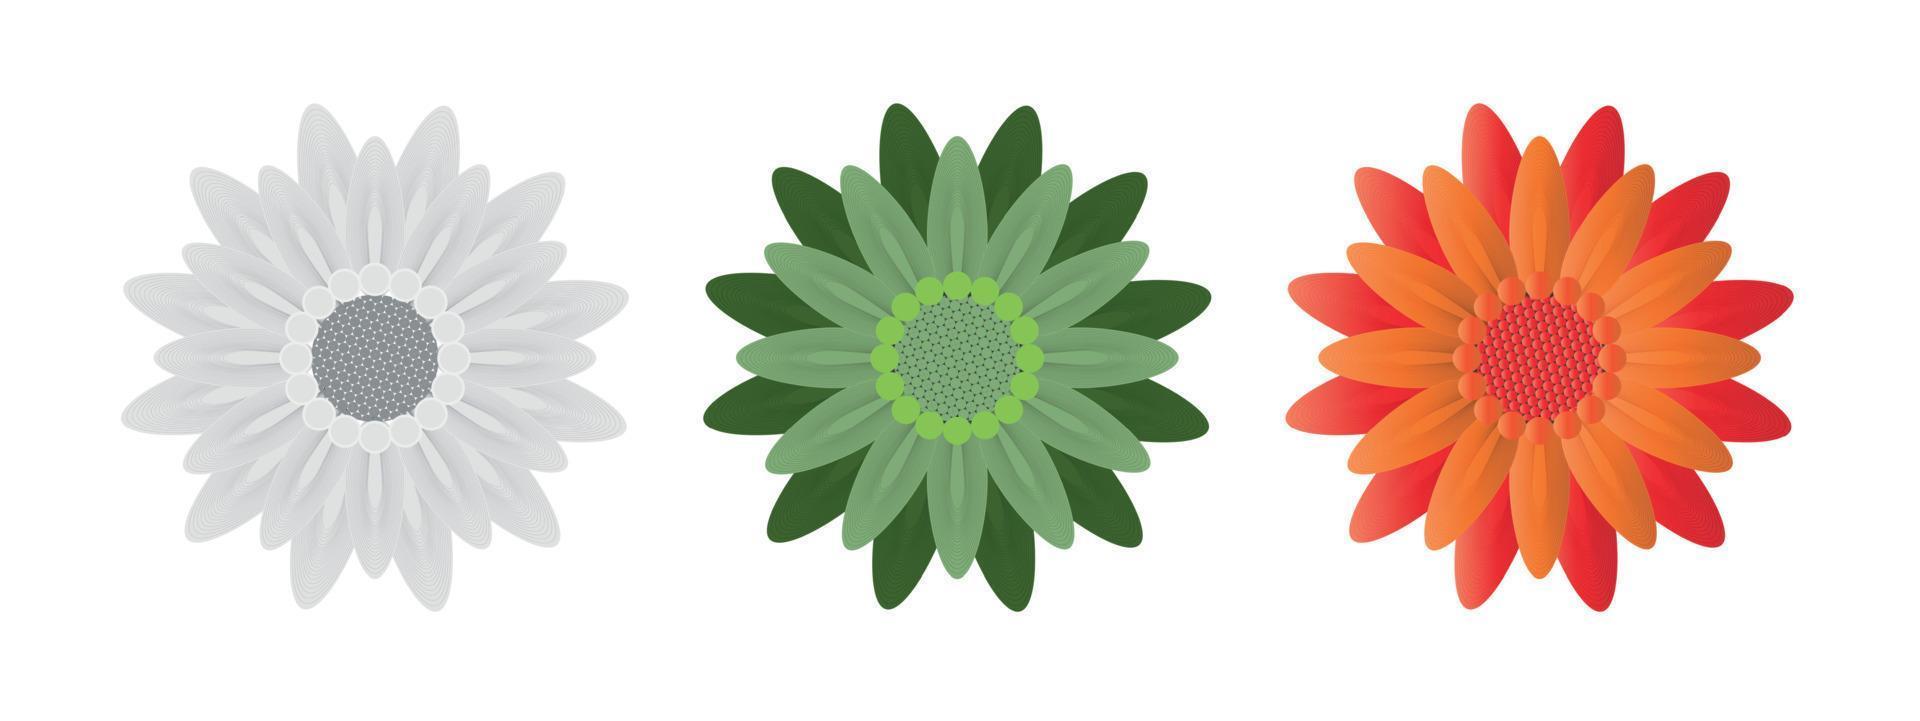 Abstract Flowers on White Background. Vector Illustration.